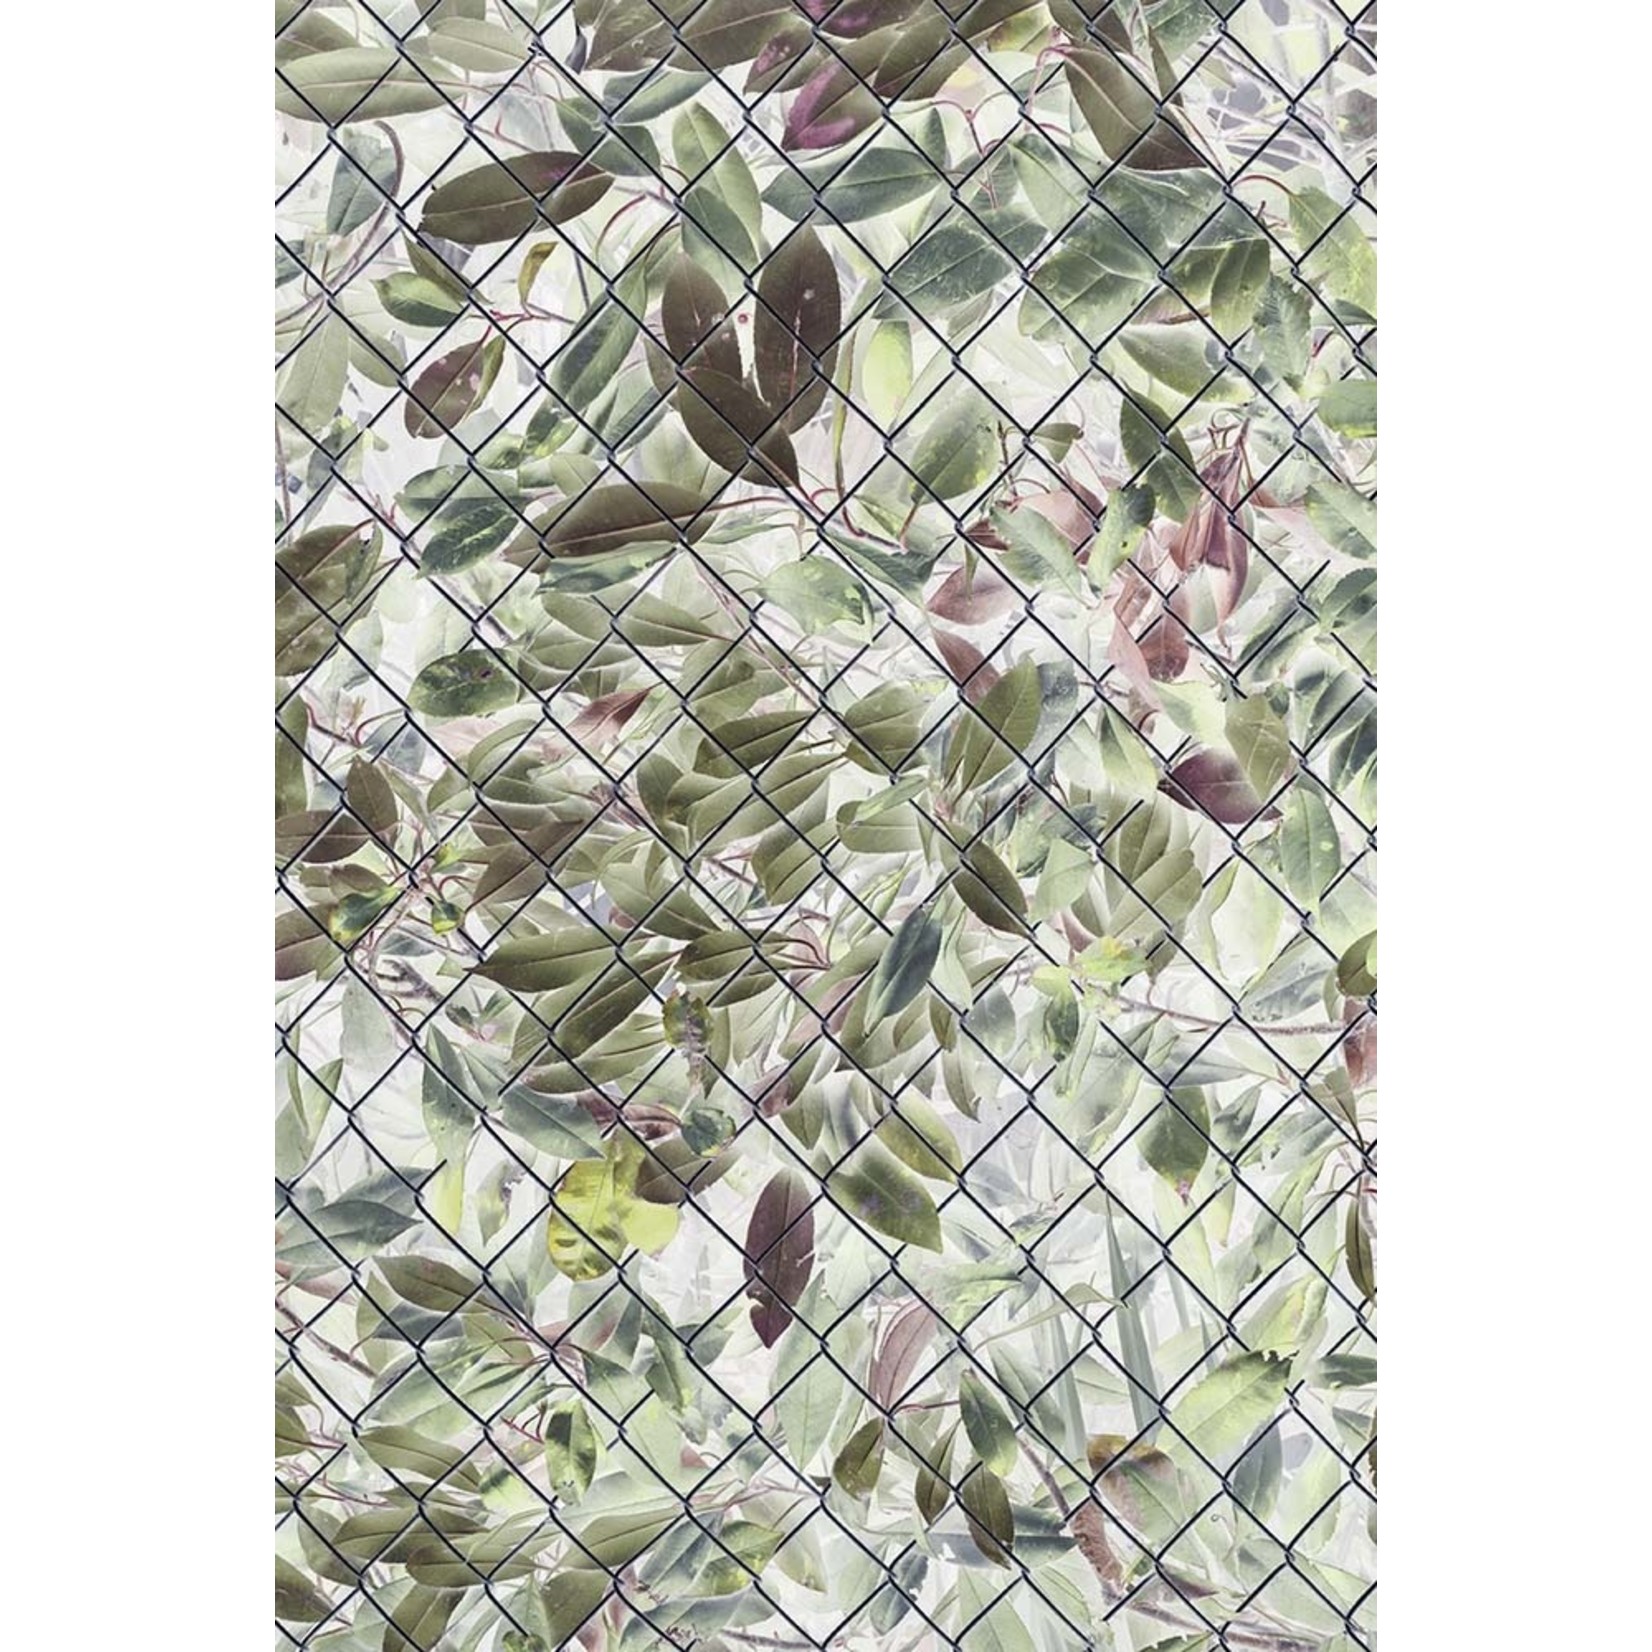 The Picturalist via Getty Images Gallery Inverted image of laurel bush and leaves behind chainlink fence by Mint Images via Getty Images Gallery